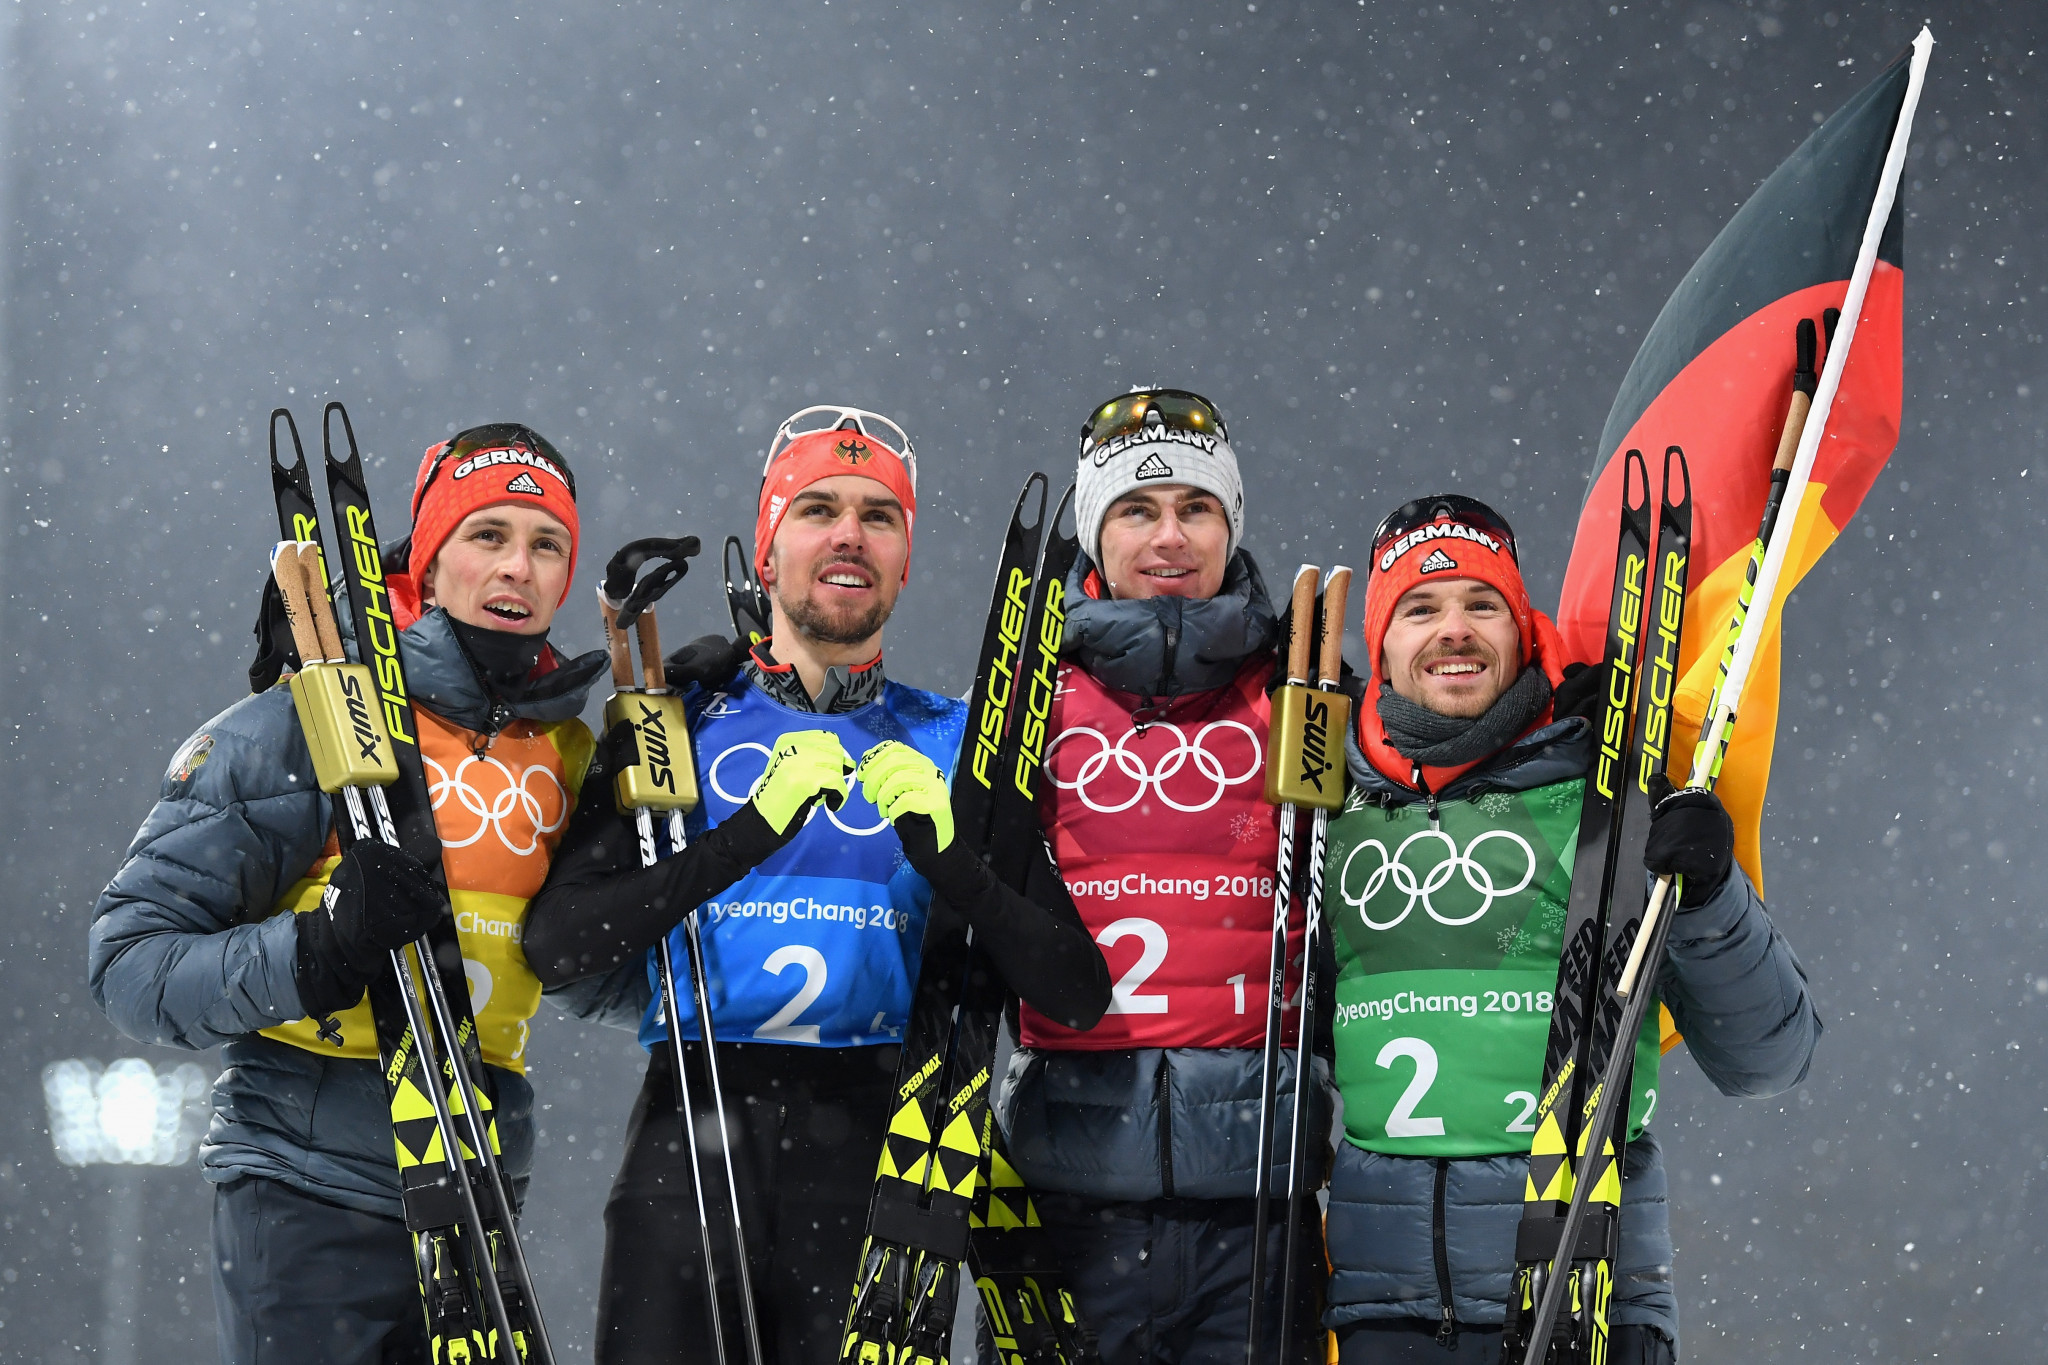 Germany ease to victory in team event as Nordic combined action at Pyeongchang 2018 concludes